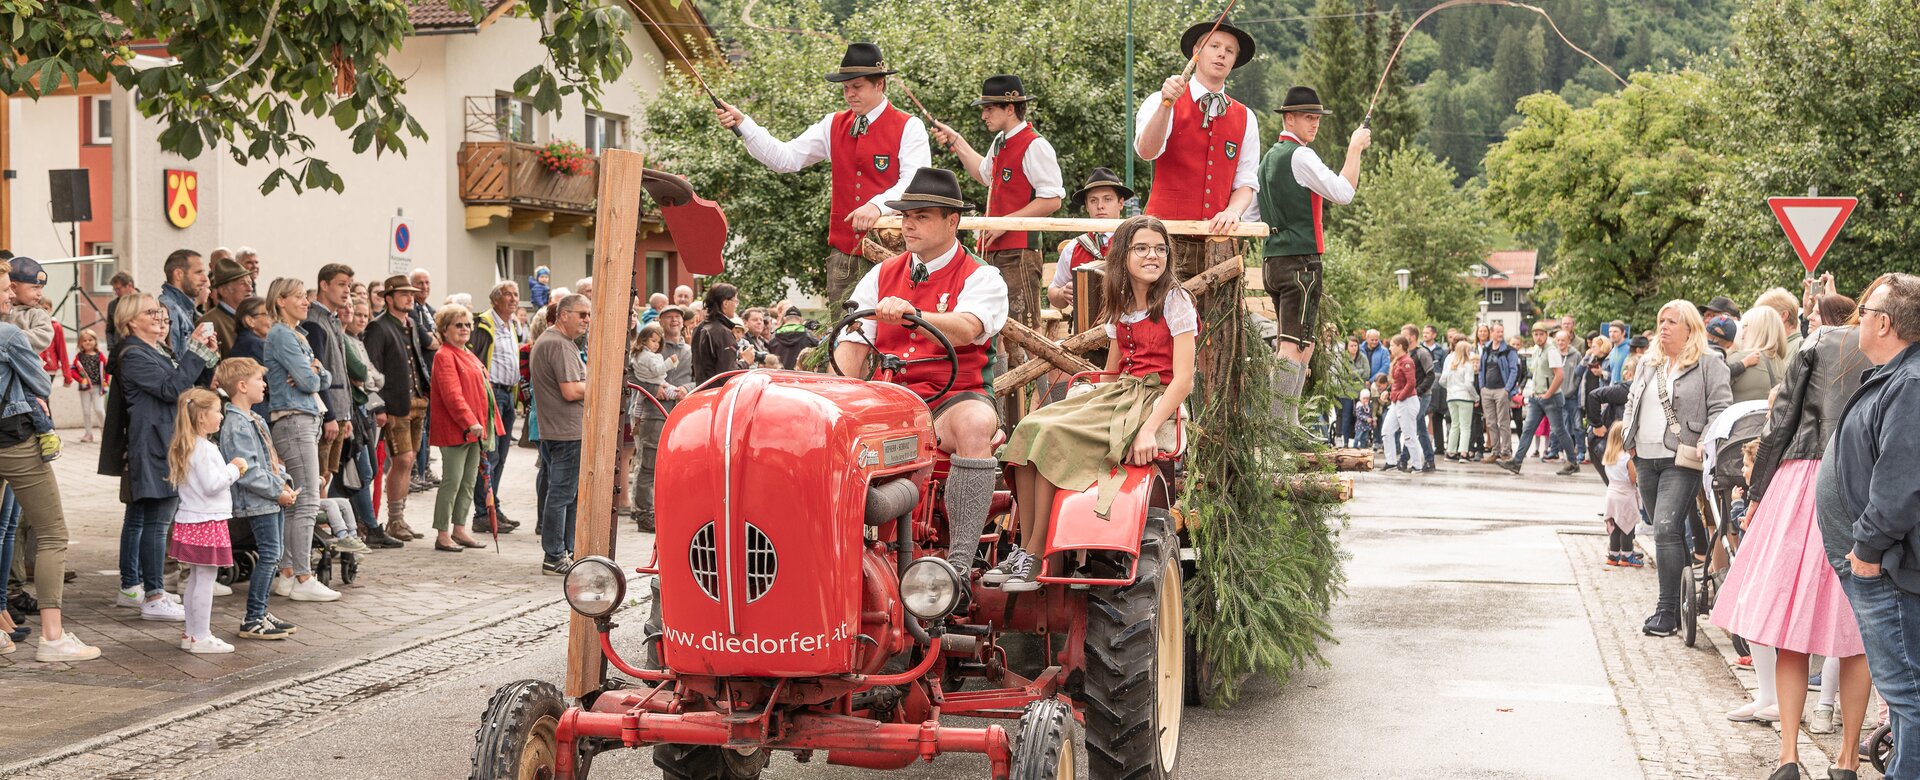 A red tractor with a trailer full of people cracking whips drives past spectators | © Gasteinertal Tourismus GmbH, Fotoatelier Wolkersdorfer